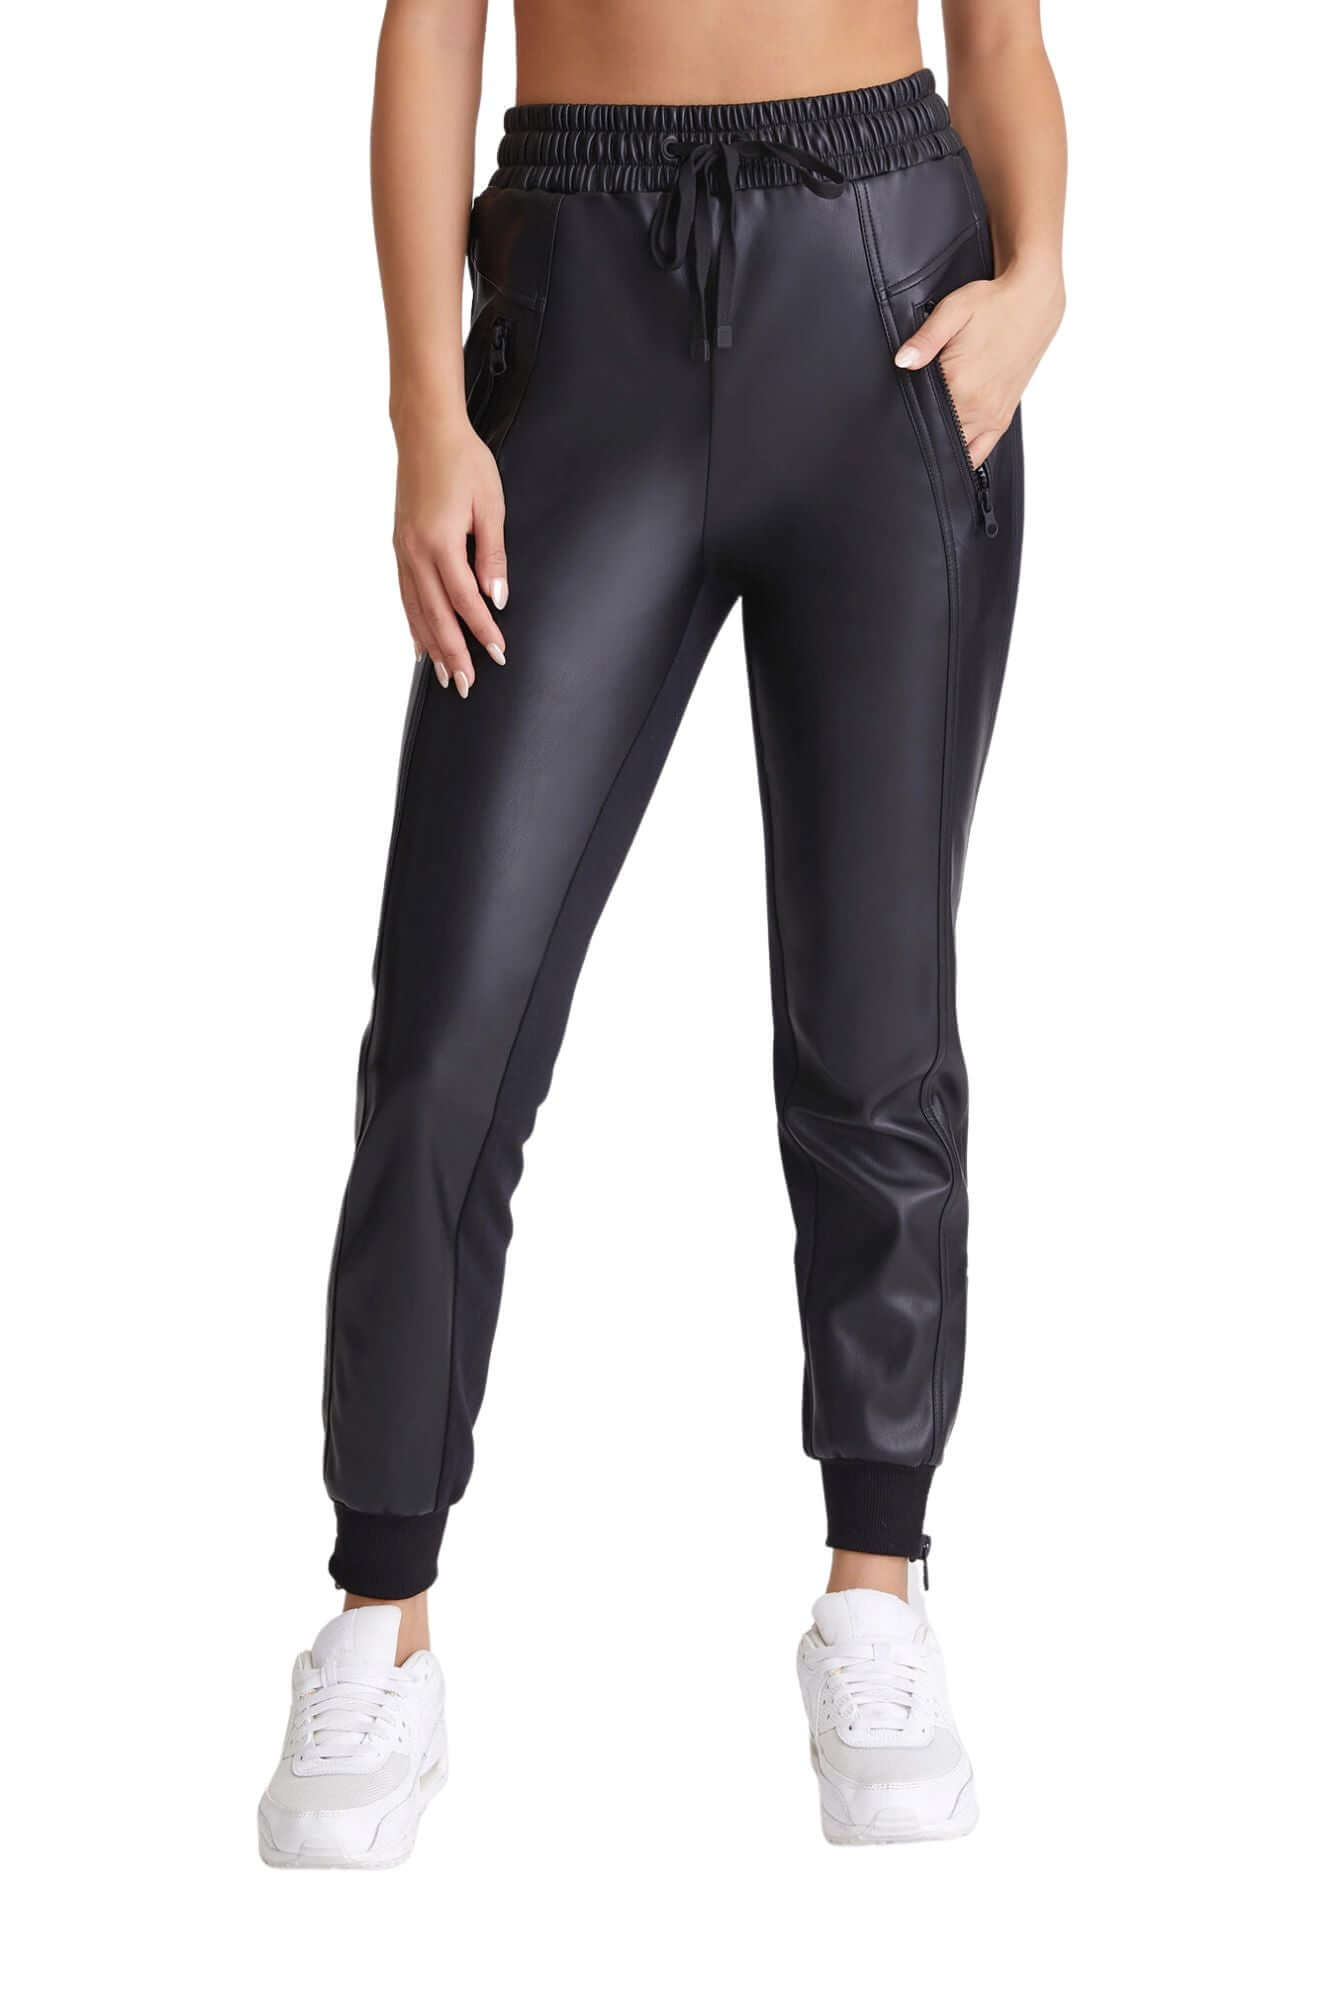 Cardiff Seamed Pant in Black